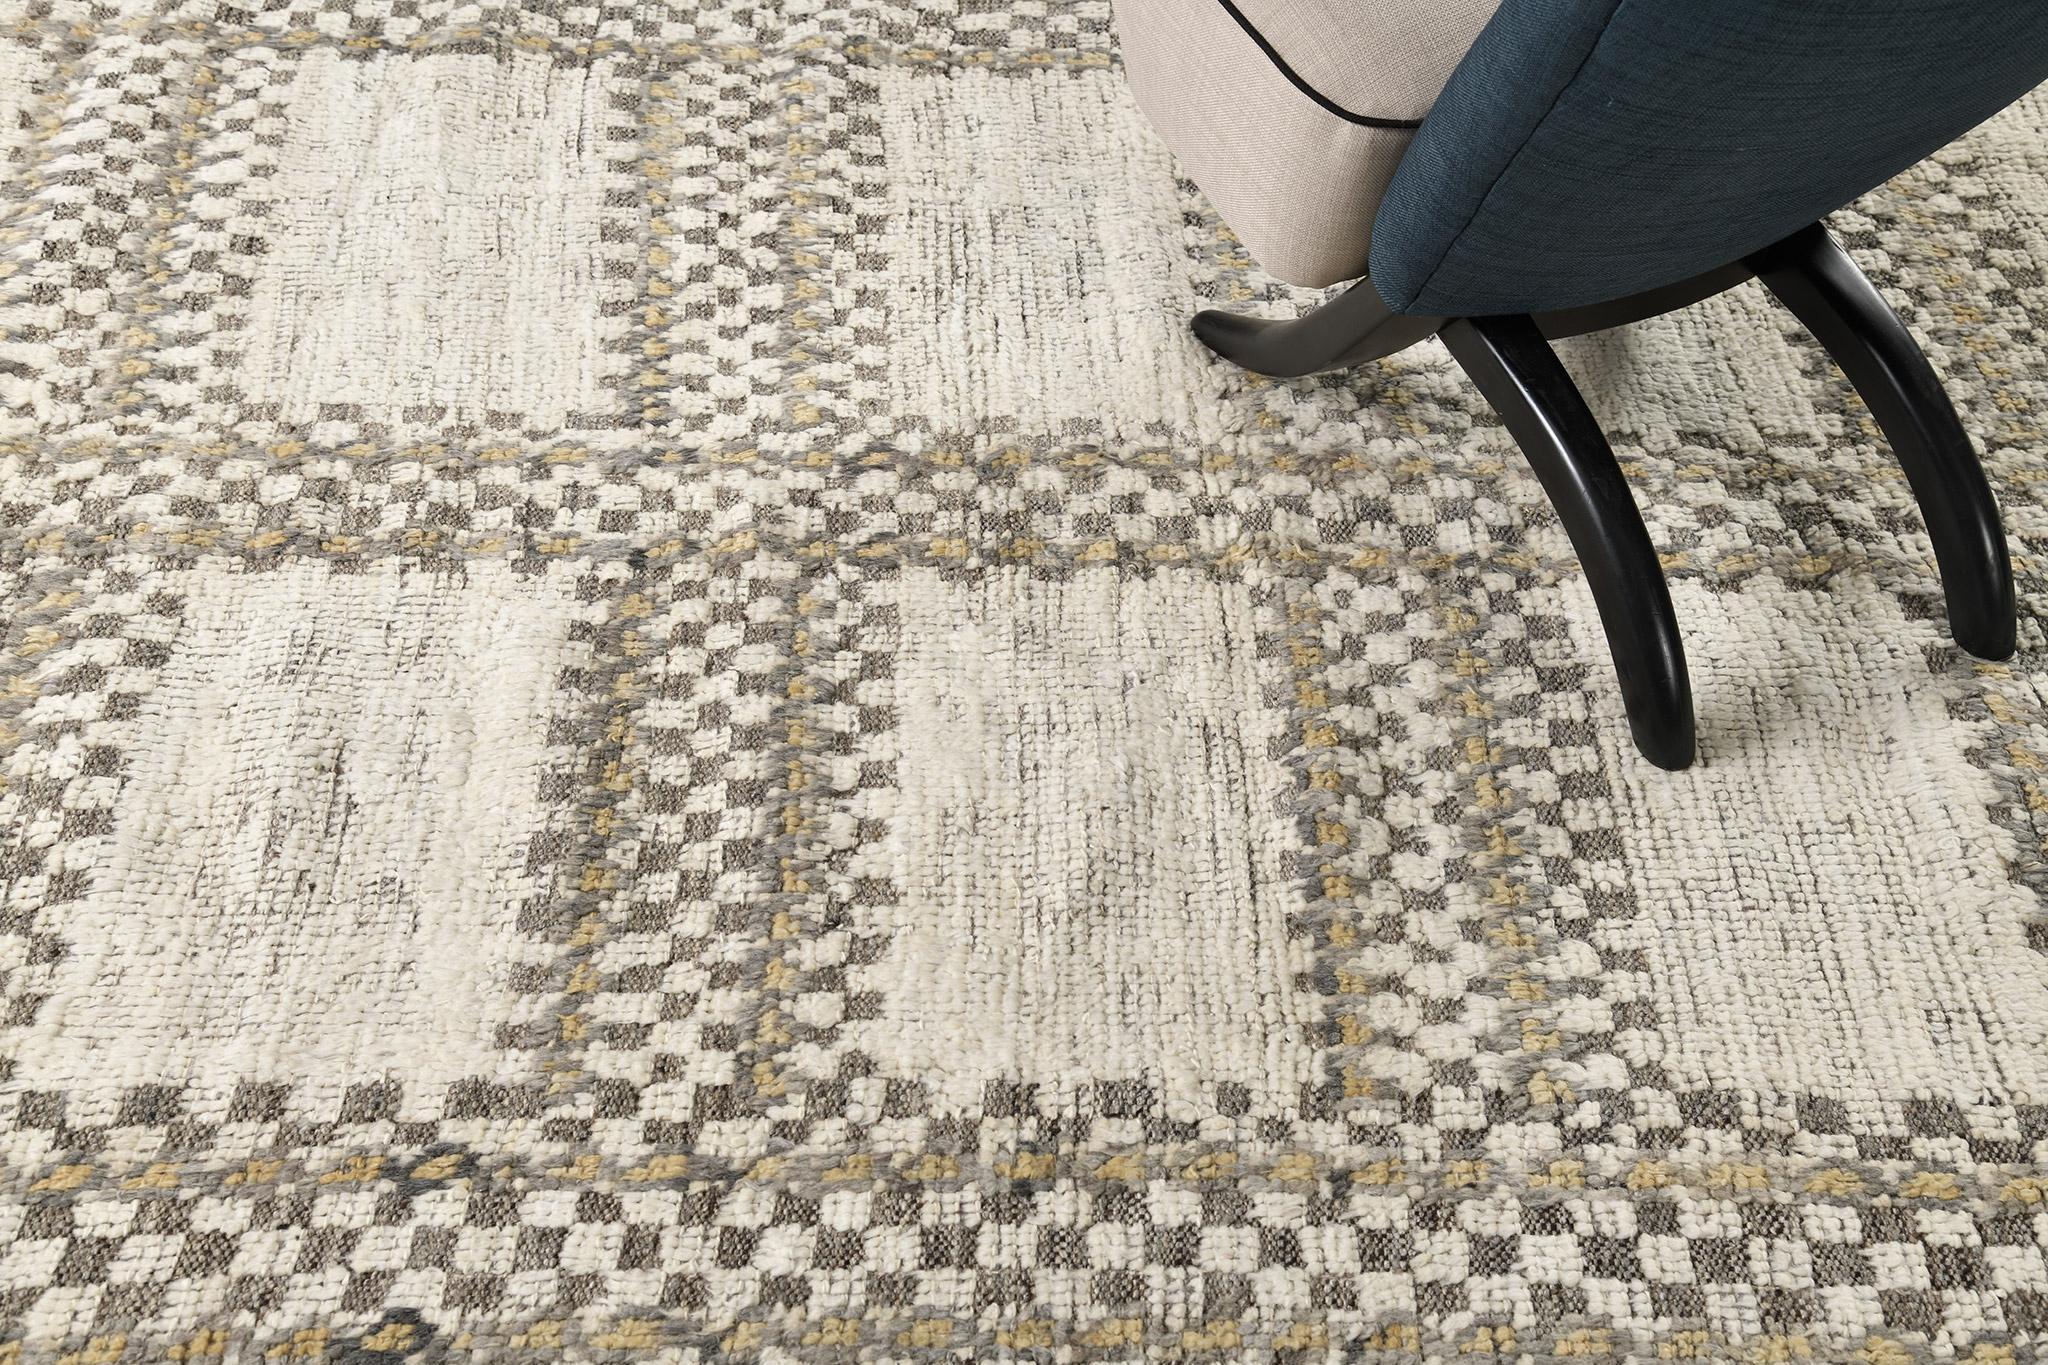 Gundiu’ in Nomad Collection features stunning gridlike patterns characterized by checkered motifs. This captivating rug boasts its earthy shades of ivory, taupe and camel that is perfect for minimalist interiors. Cozy and sophisticated, this rug